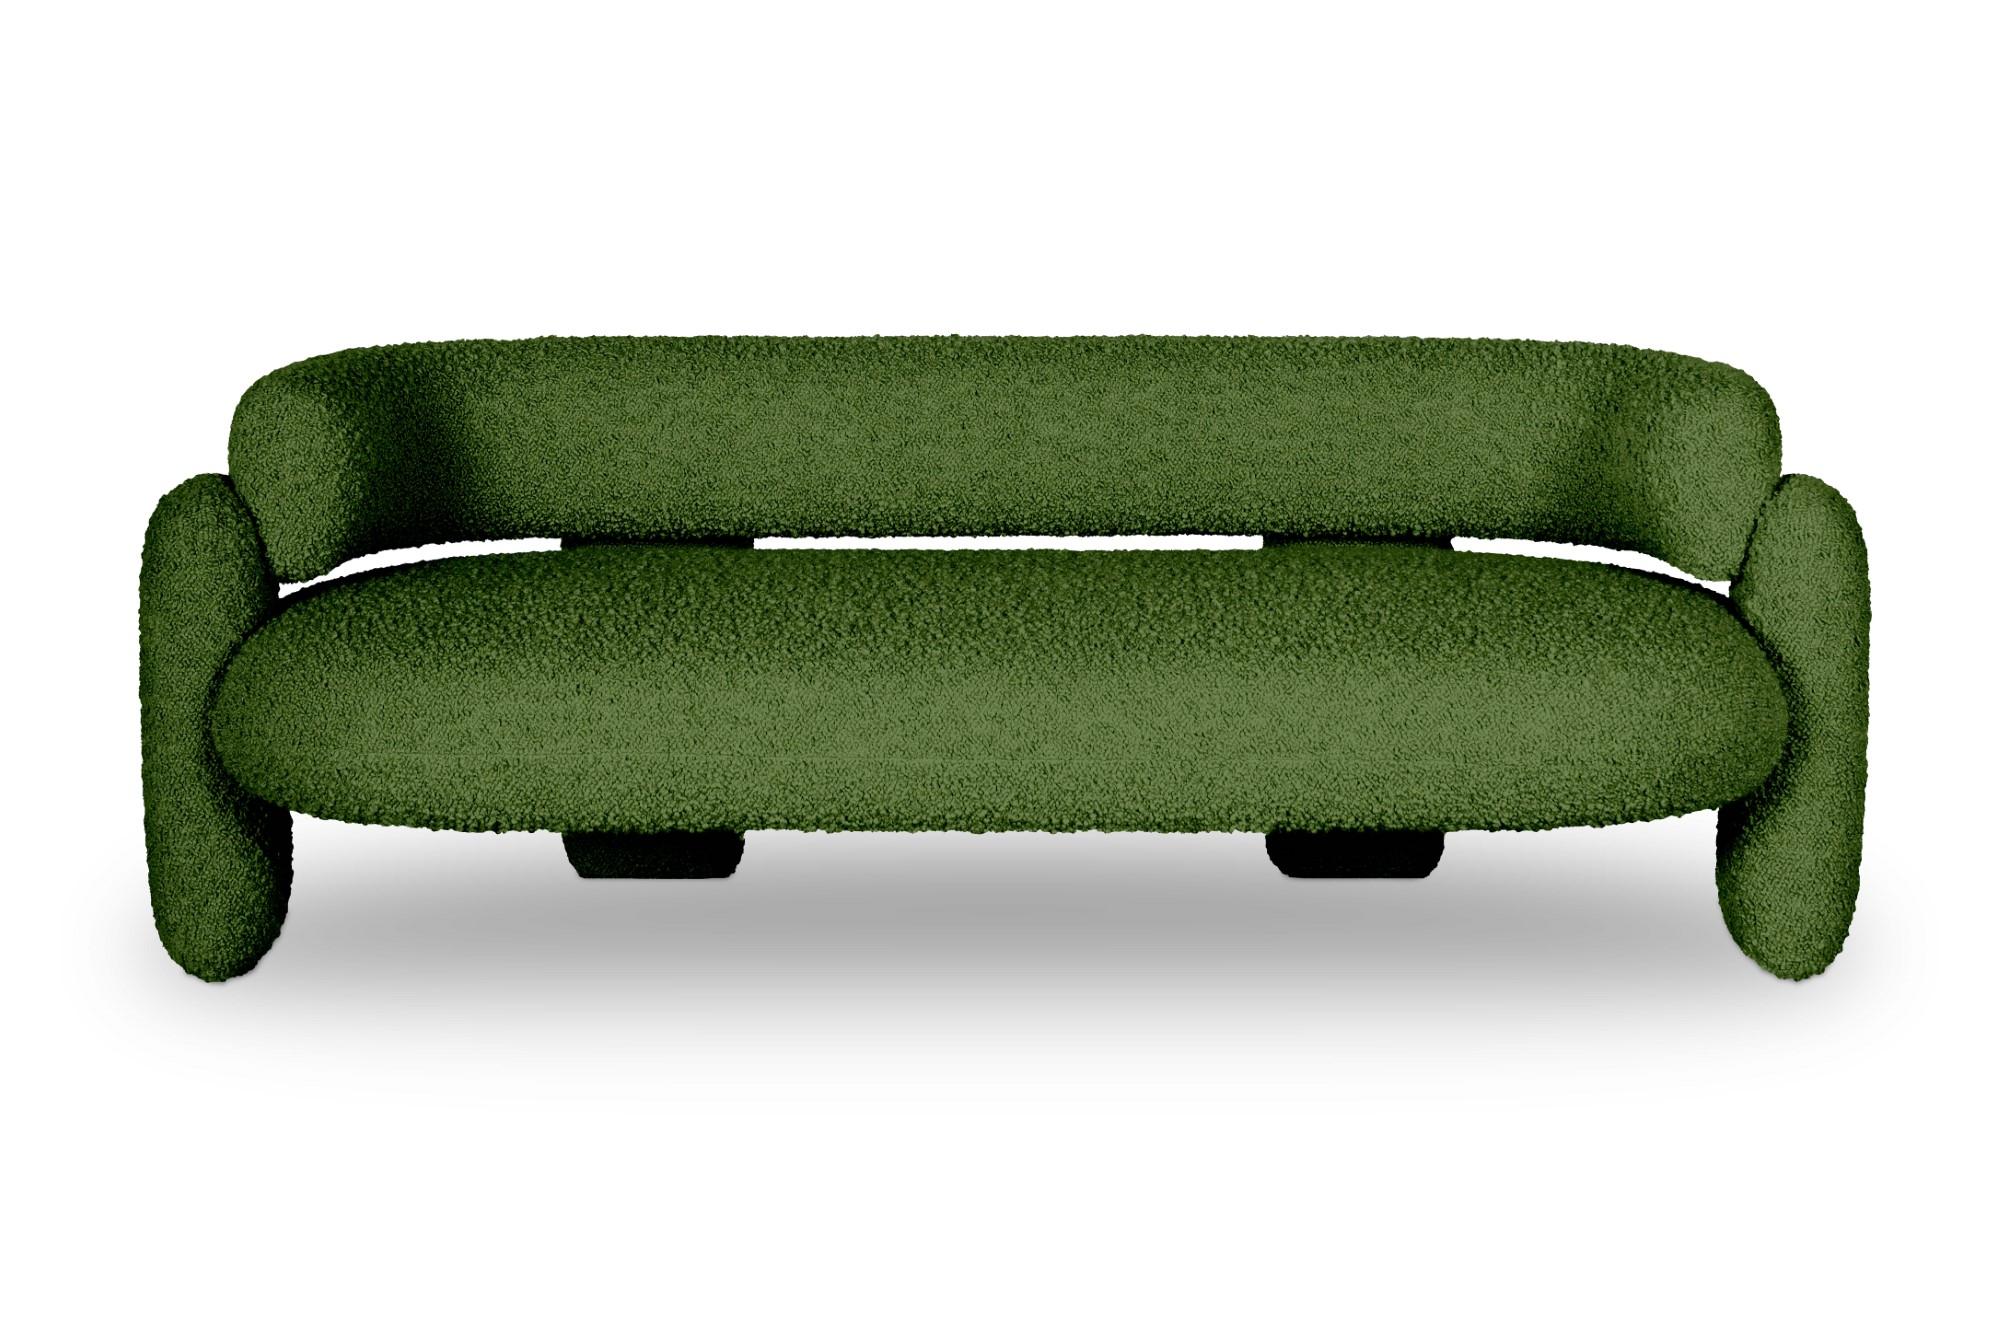 Embrace cormo emerald sofa by Royal Stranger
Dimensions: W 200 x H 70 x D 90 cm. Seat Height 47 cm.
Materials: Solid wood frame, foam, upholstery.
Available in other Royal Stranger’s fabrics and in COM.

Embrace sofa is fond of neat lines. It